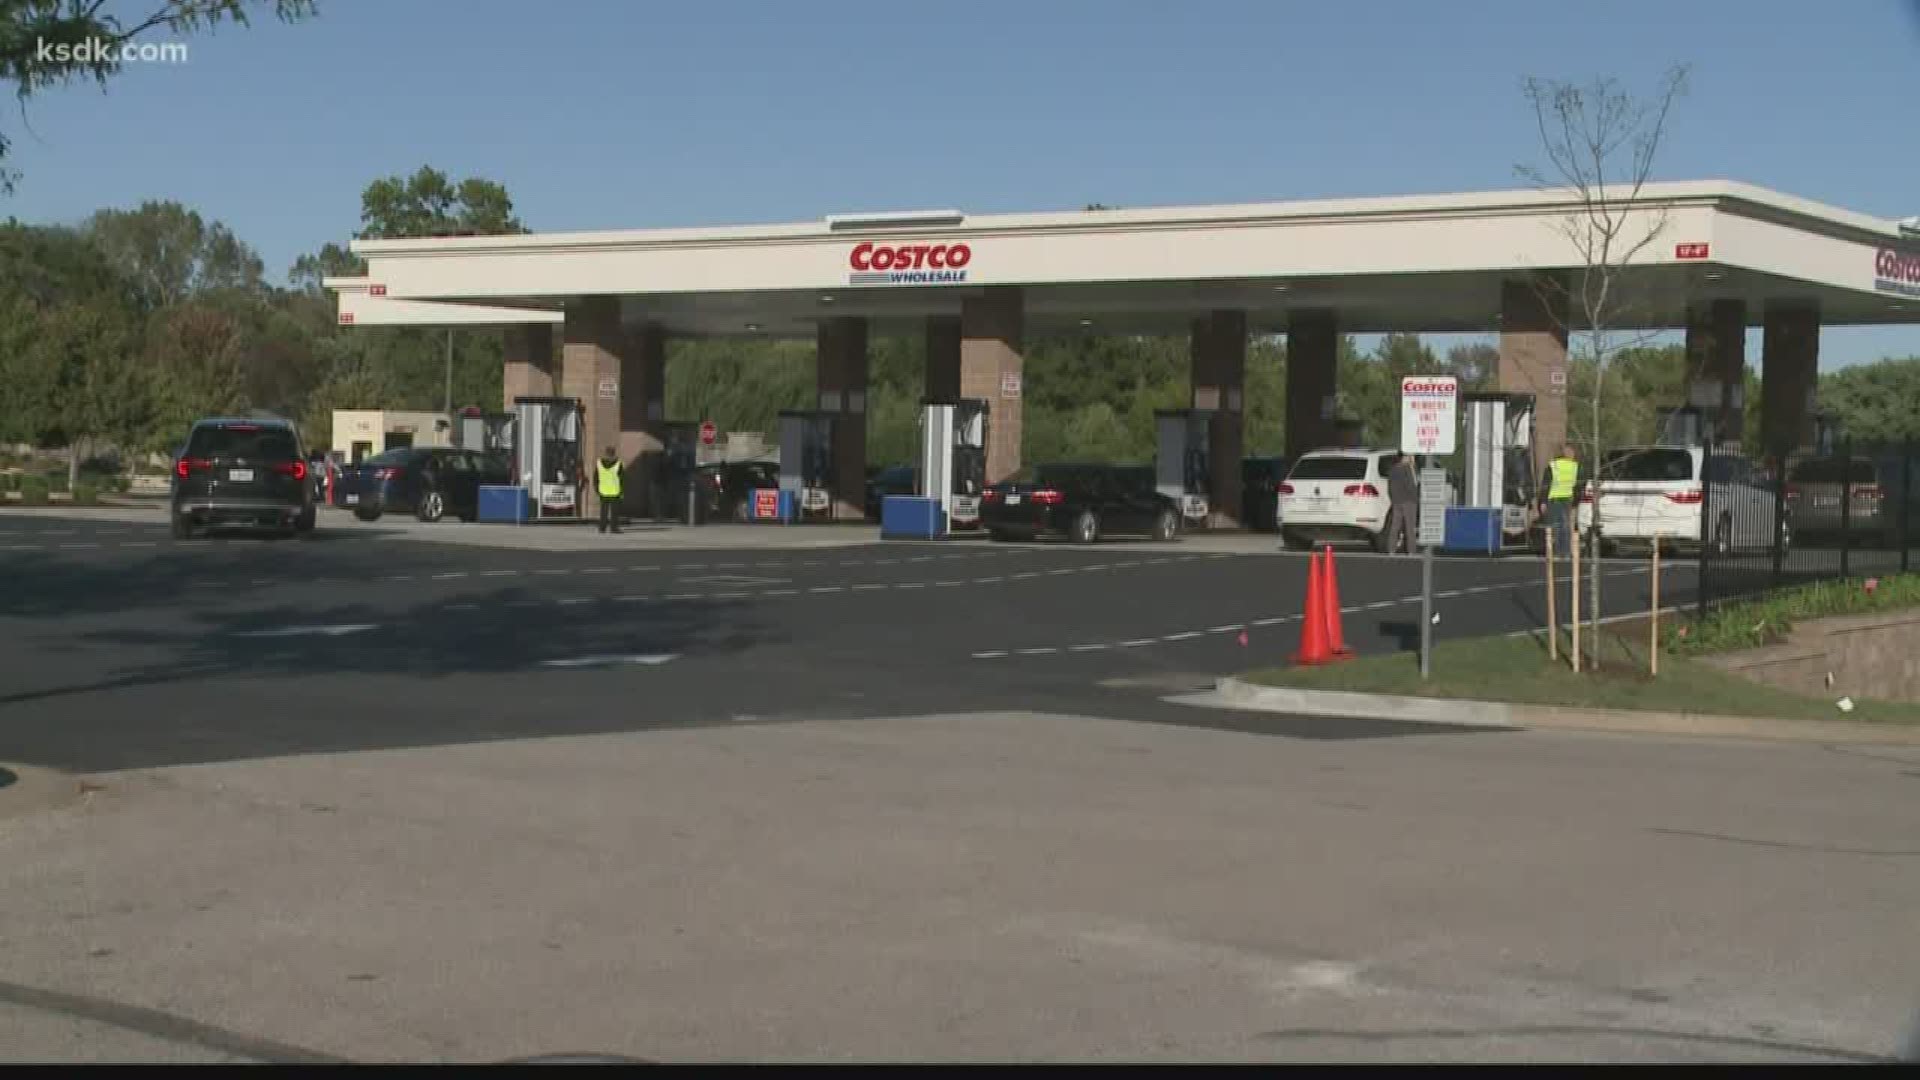 A local woman says it could cost $800 to fix her car after she filled it with E-85 instead of regular gasoline.